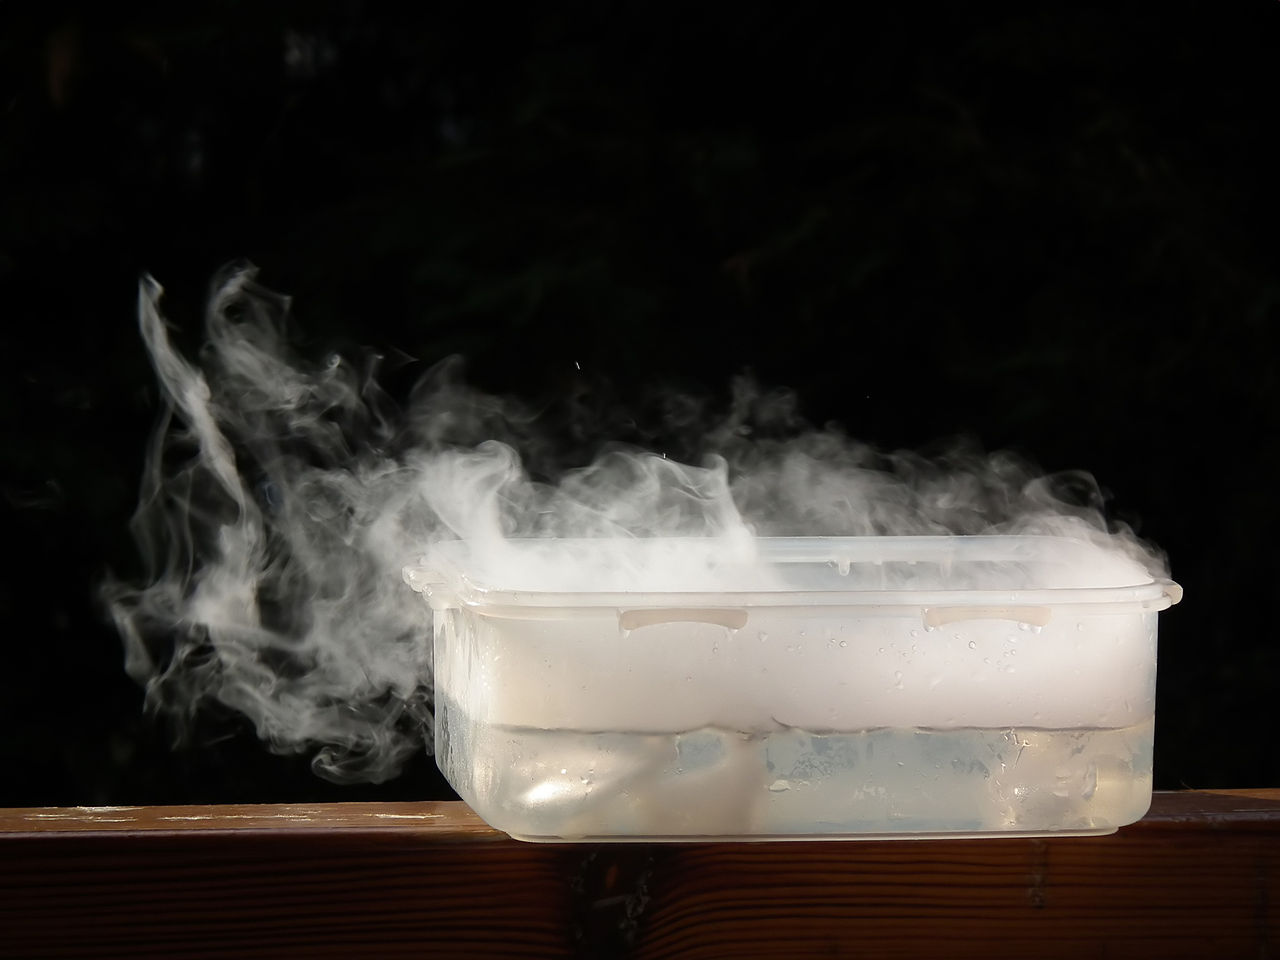 what is dry ice made of and why does dry ice produce smoke